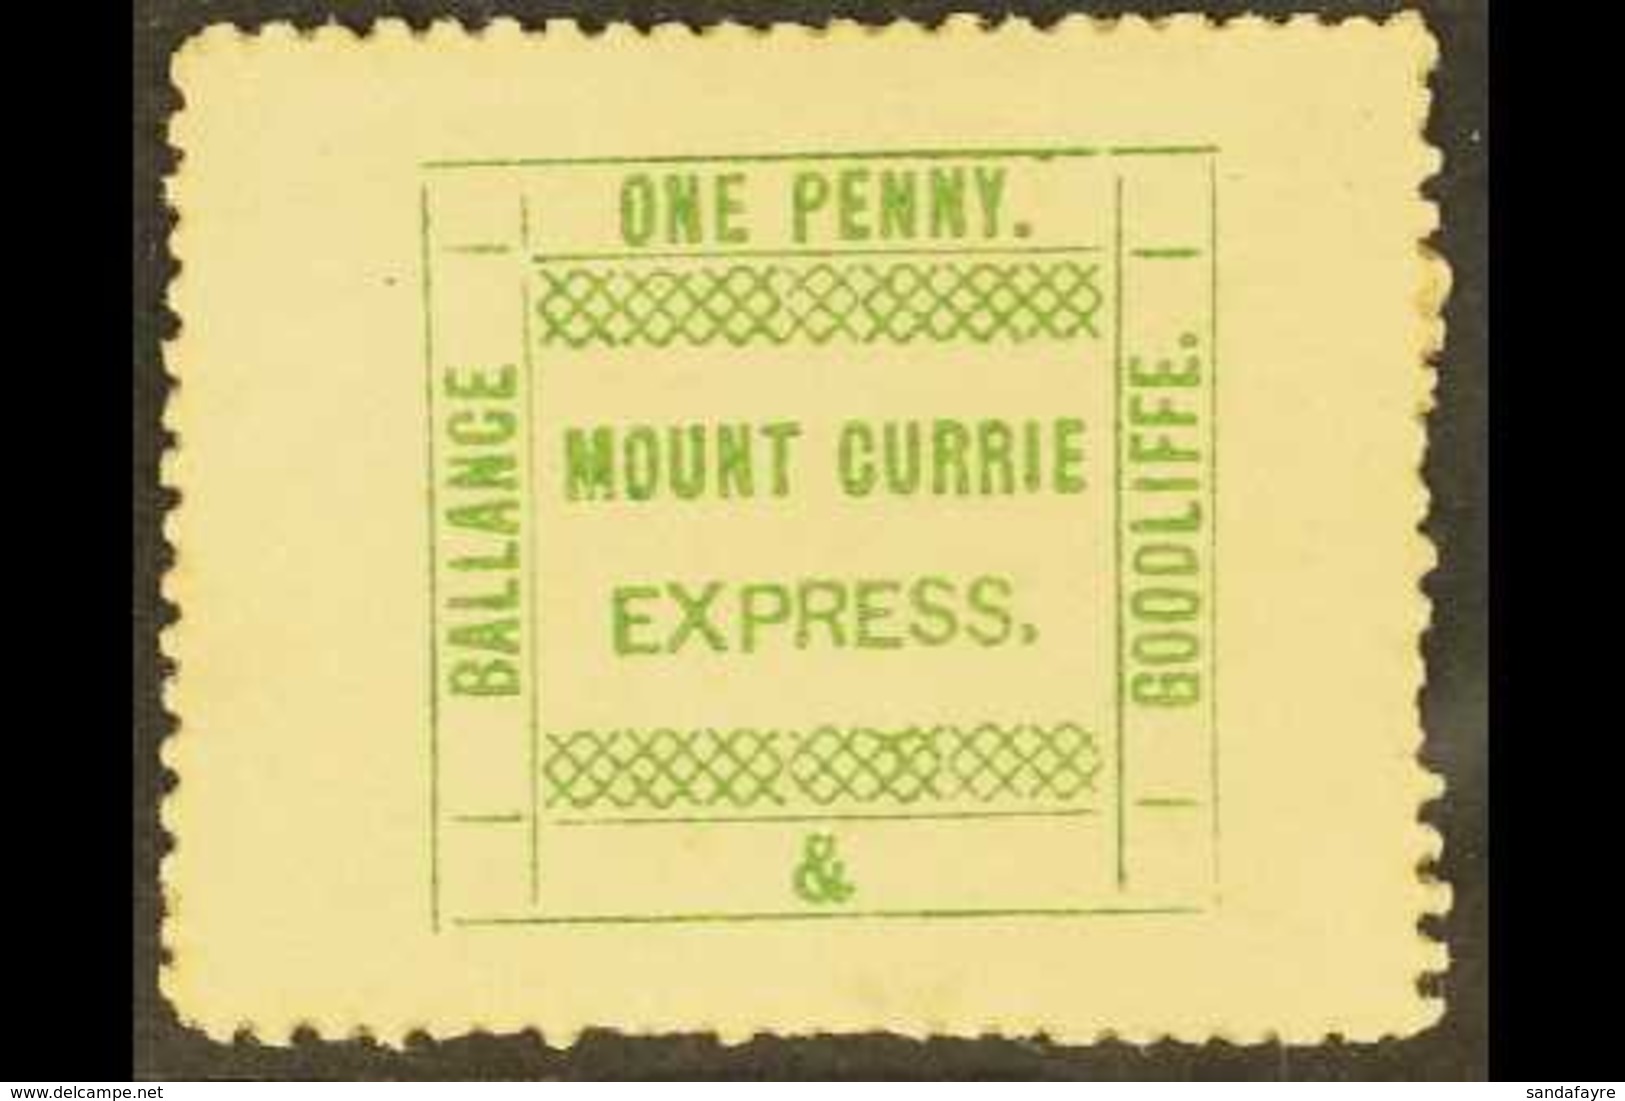 EAST GRIQUALAND - MOUNT CURRIE EXPRESS 1d Green , Ballance And Goodliffe Courier Post Stamp, Very Fine Mint Og. Extremel - Unclassified